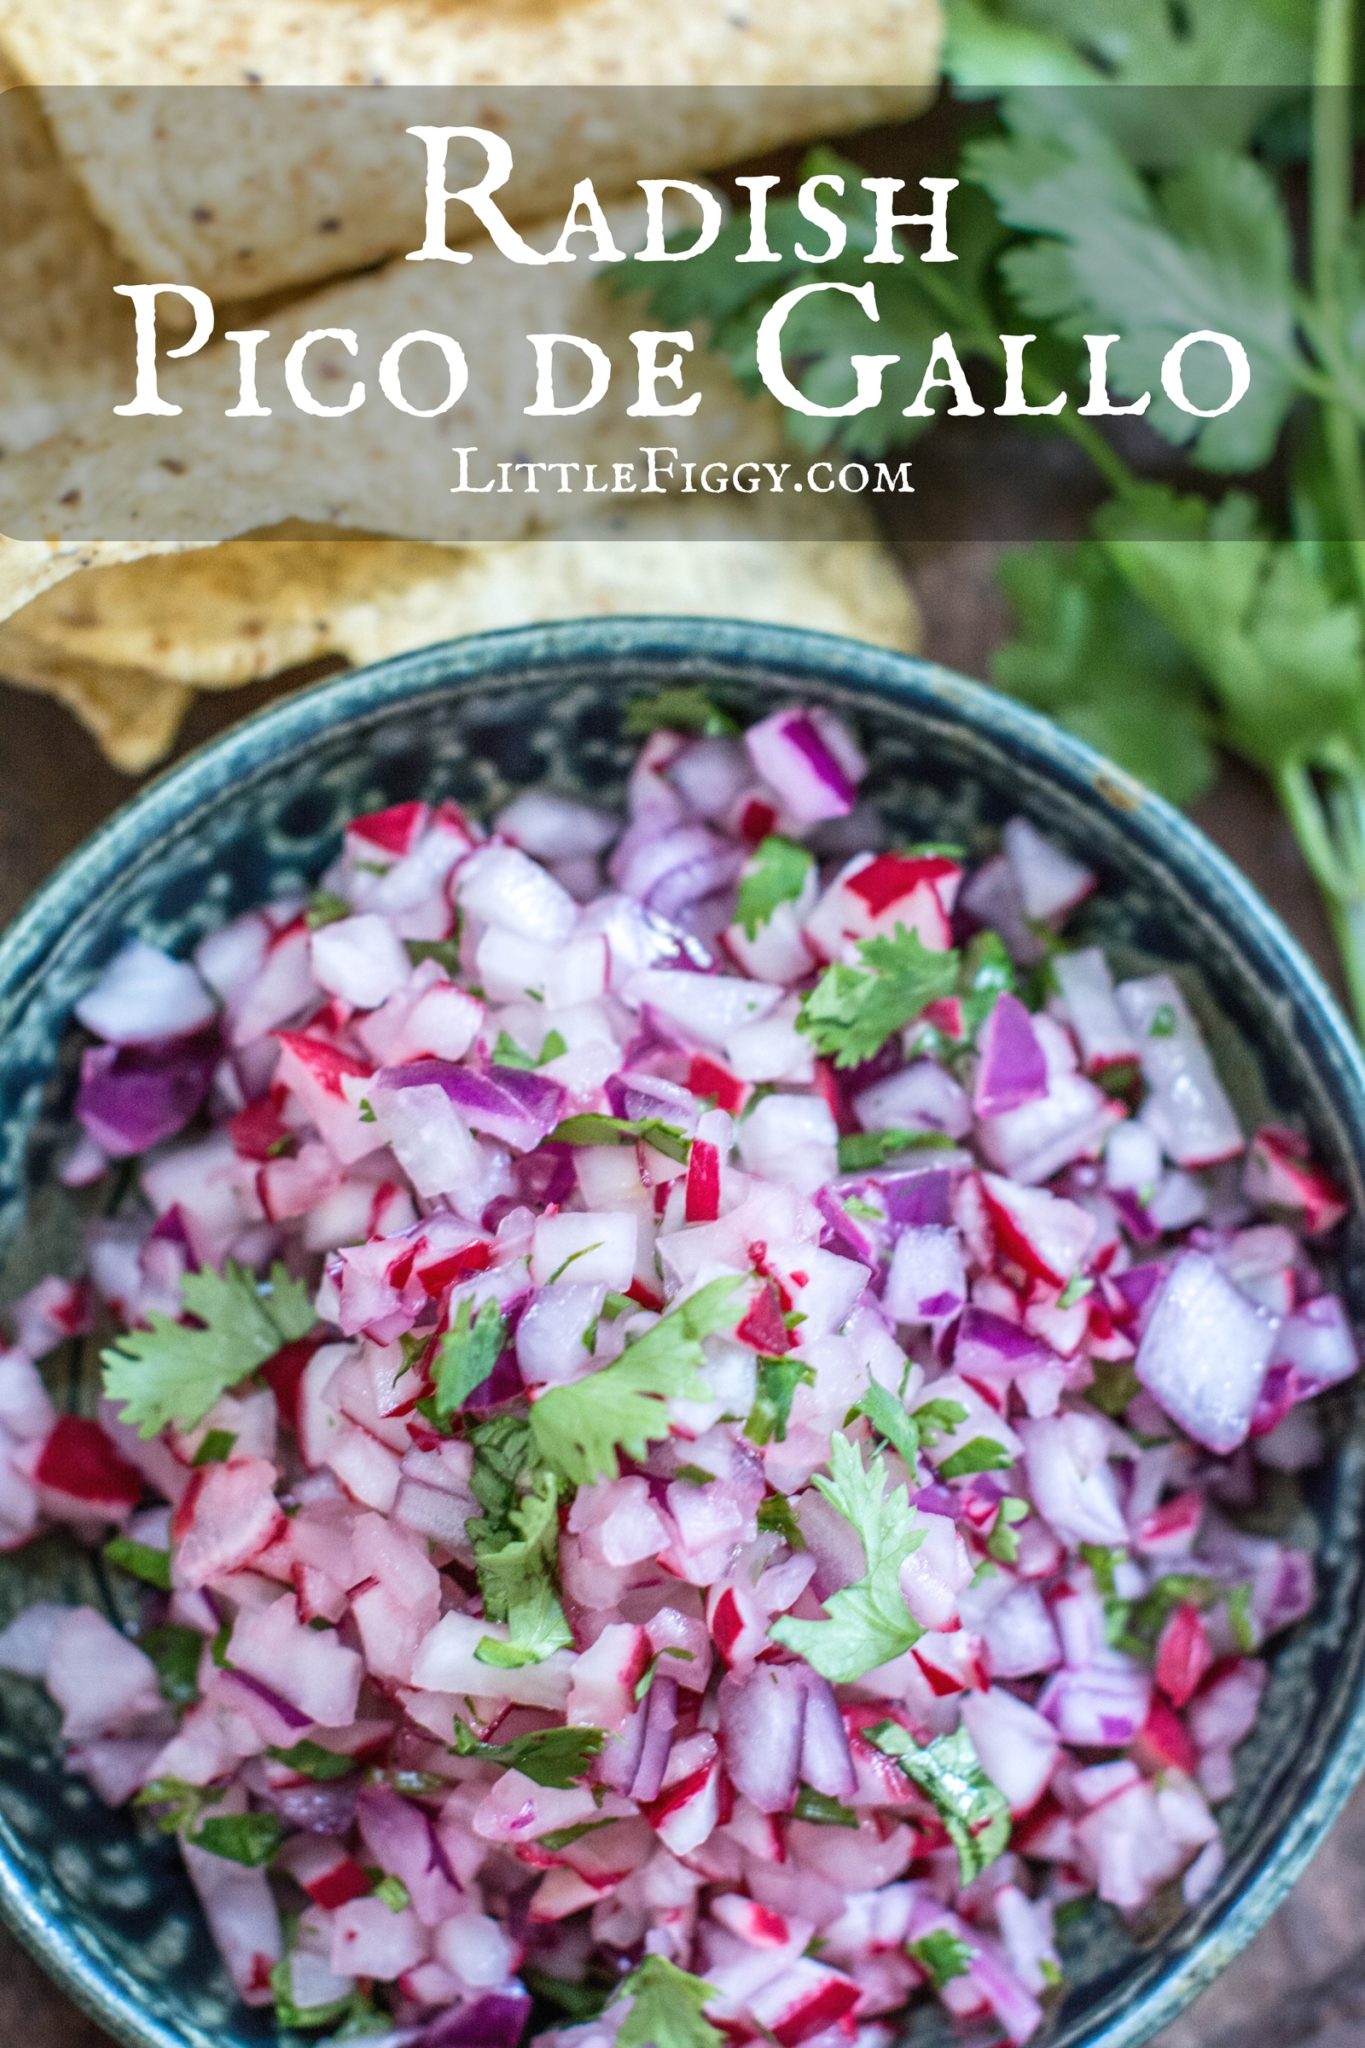 It's a gorgeous twist from the traditional, Radish Pico de Gallo! It's full of lovely flavors and tastes amazing. Find the recipe at Little Figgy Food